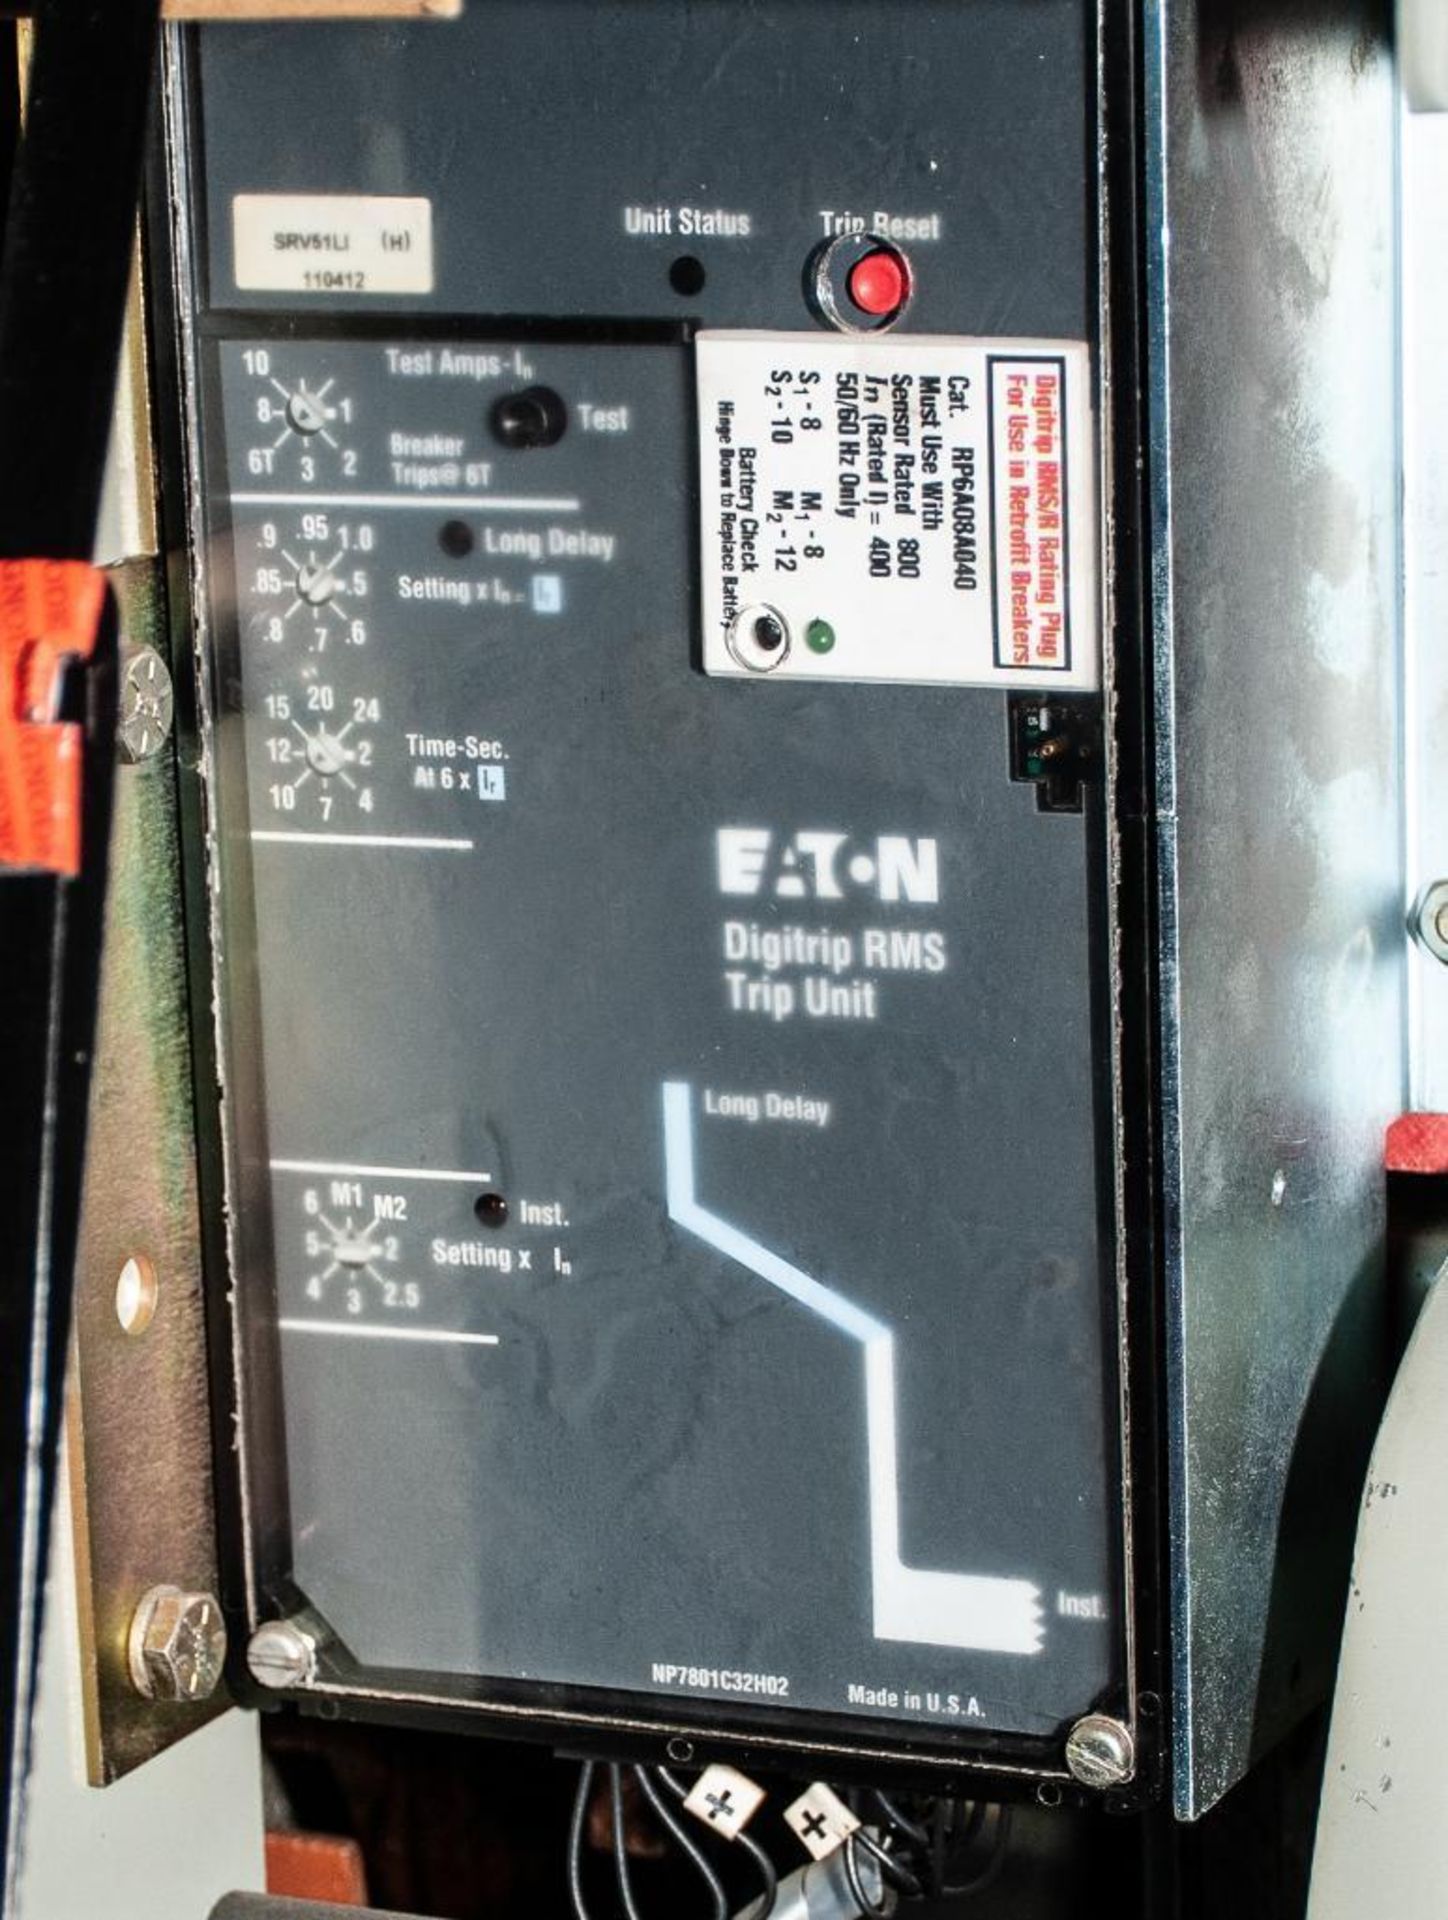 GE Low Voltage Circuit Breaker W/ Eaton Digitrip RMS Trip Unit, Appears to Be New Never Installed, S - Image 5 of 9